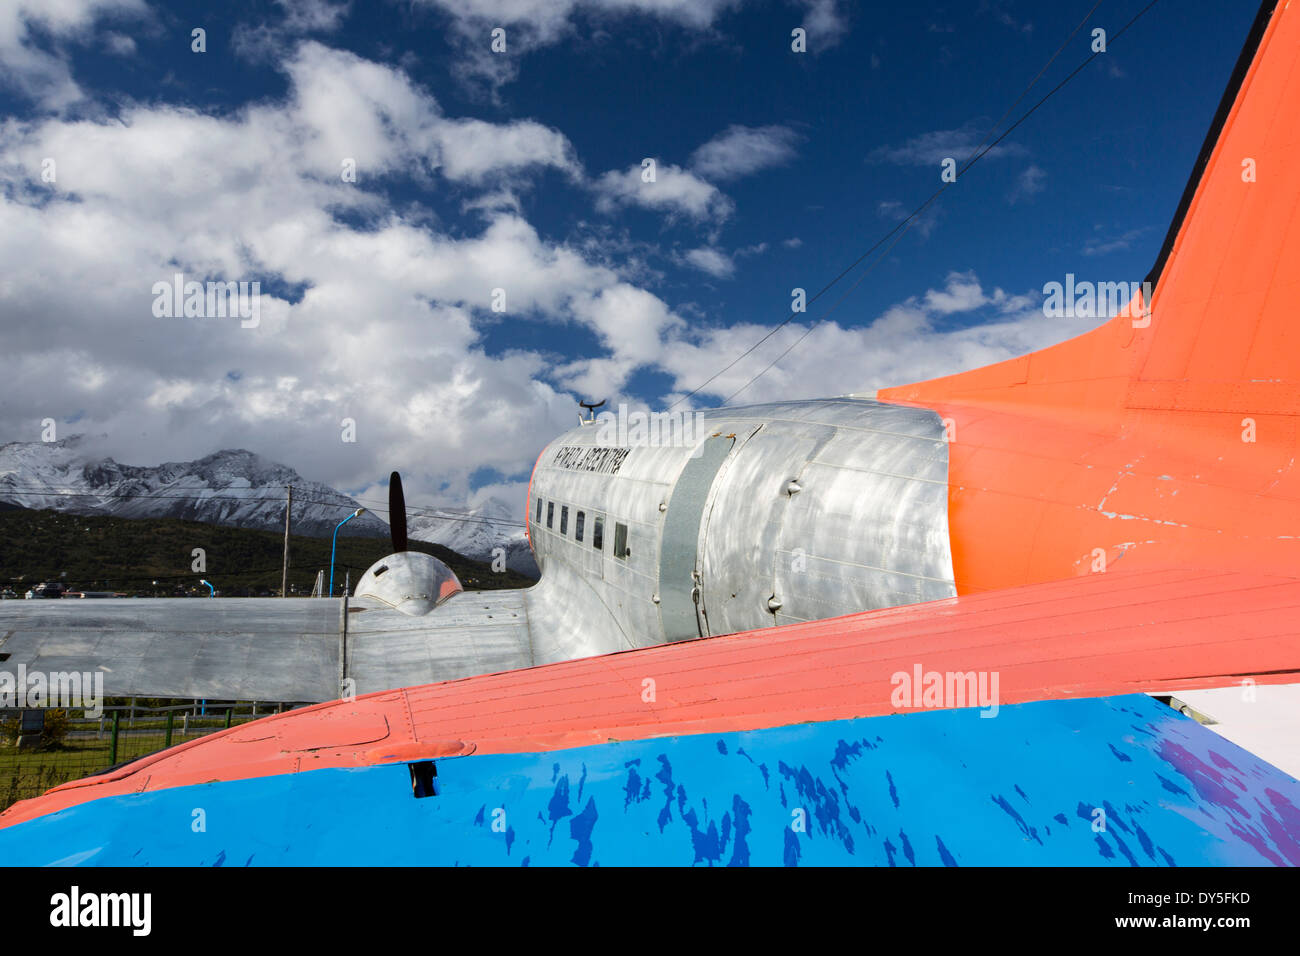 An old DC3- 5 Tango 22 air plane in Ushuaia which is the capital of Tierra del Fuego, in Argentina Stock Photo